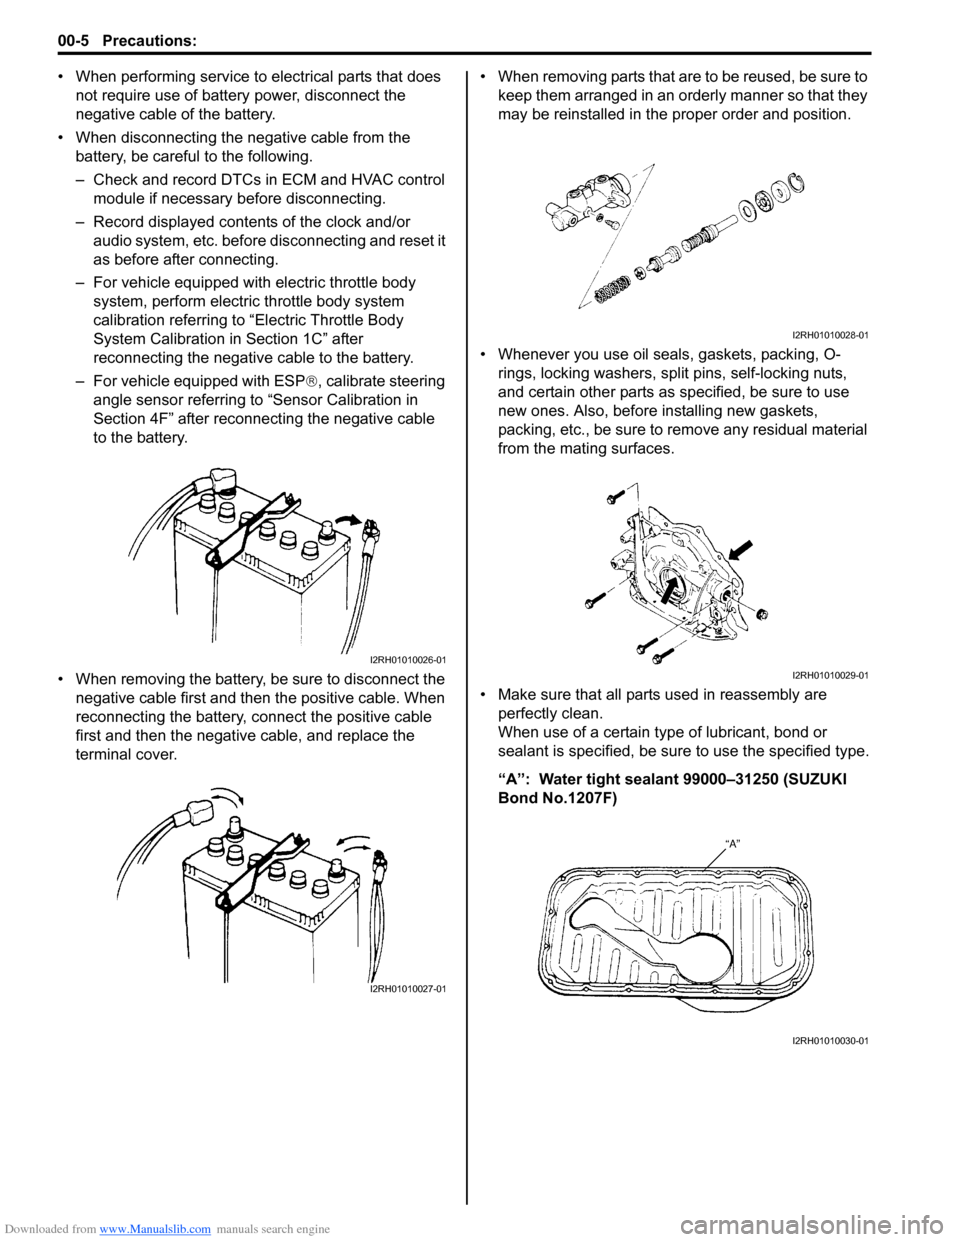 SUZUKI SWIFT 2005 2.G Service Workshop Manual Downloaded from www.Manualslib.com manuals search engine 00-5 Precautions: 
• When performing service to electrical parts that does not require use of battery power, disconnect the 
negative cable o